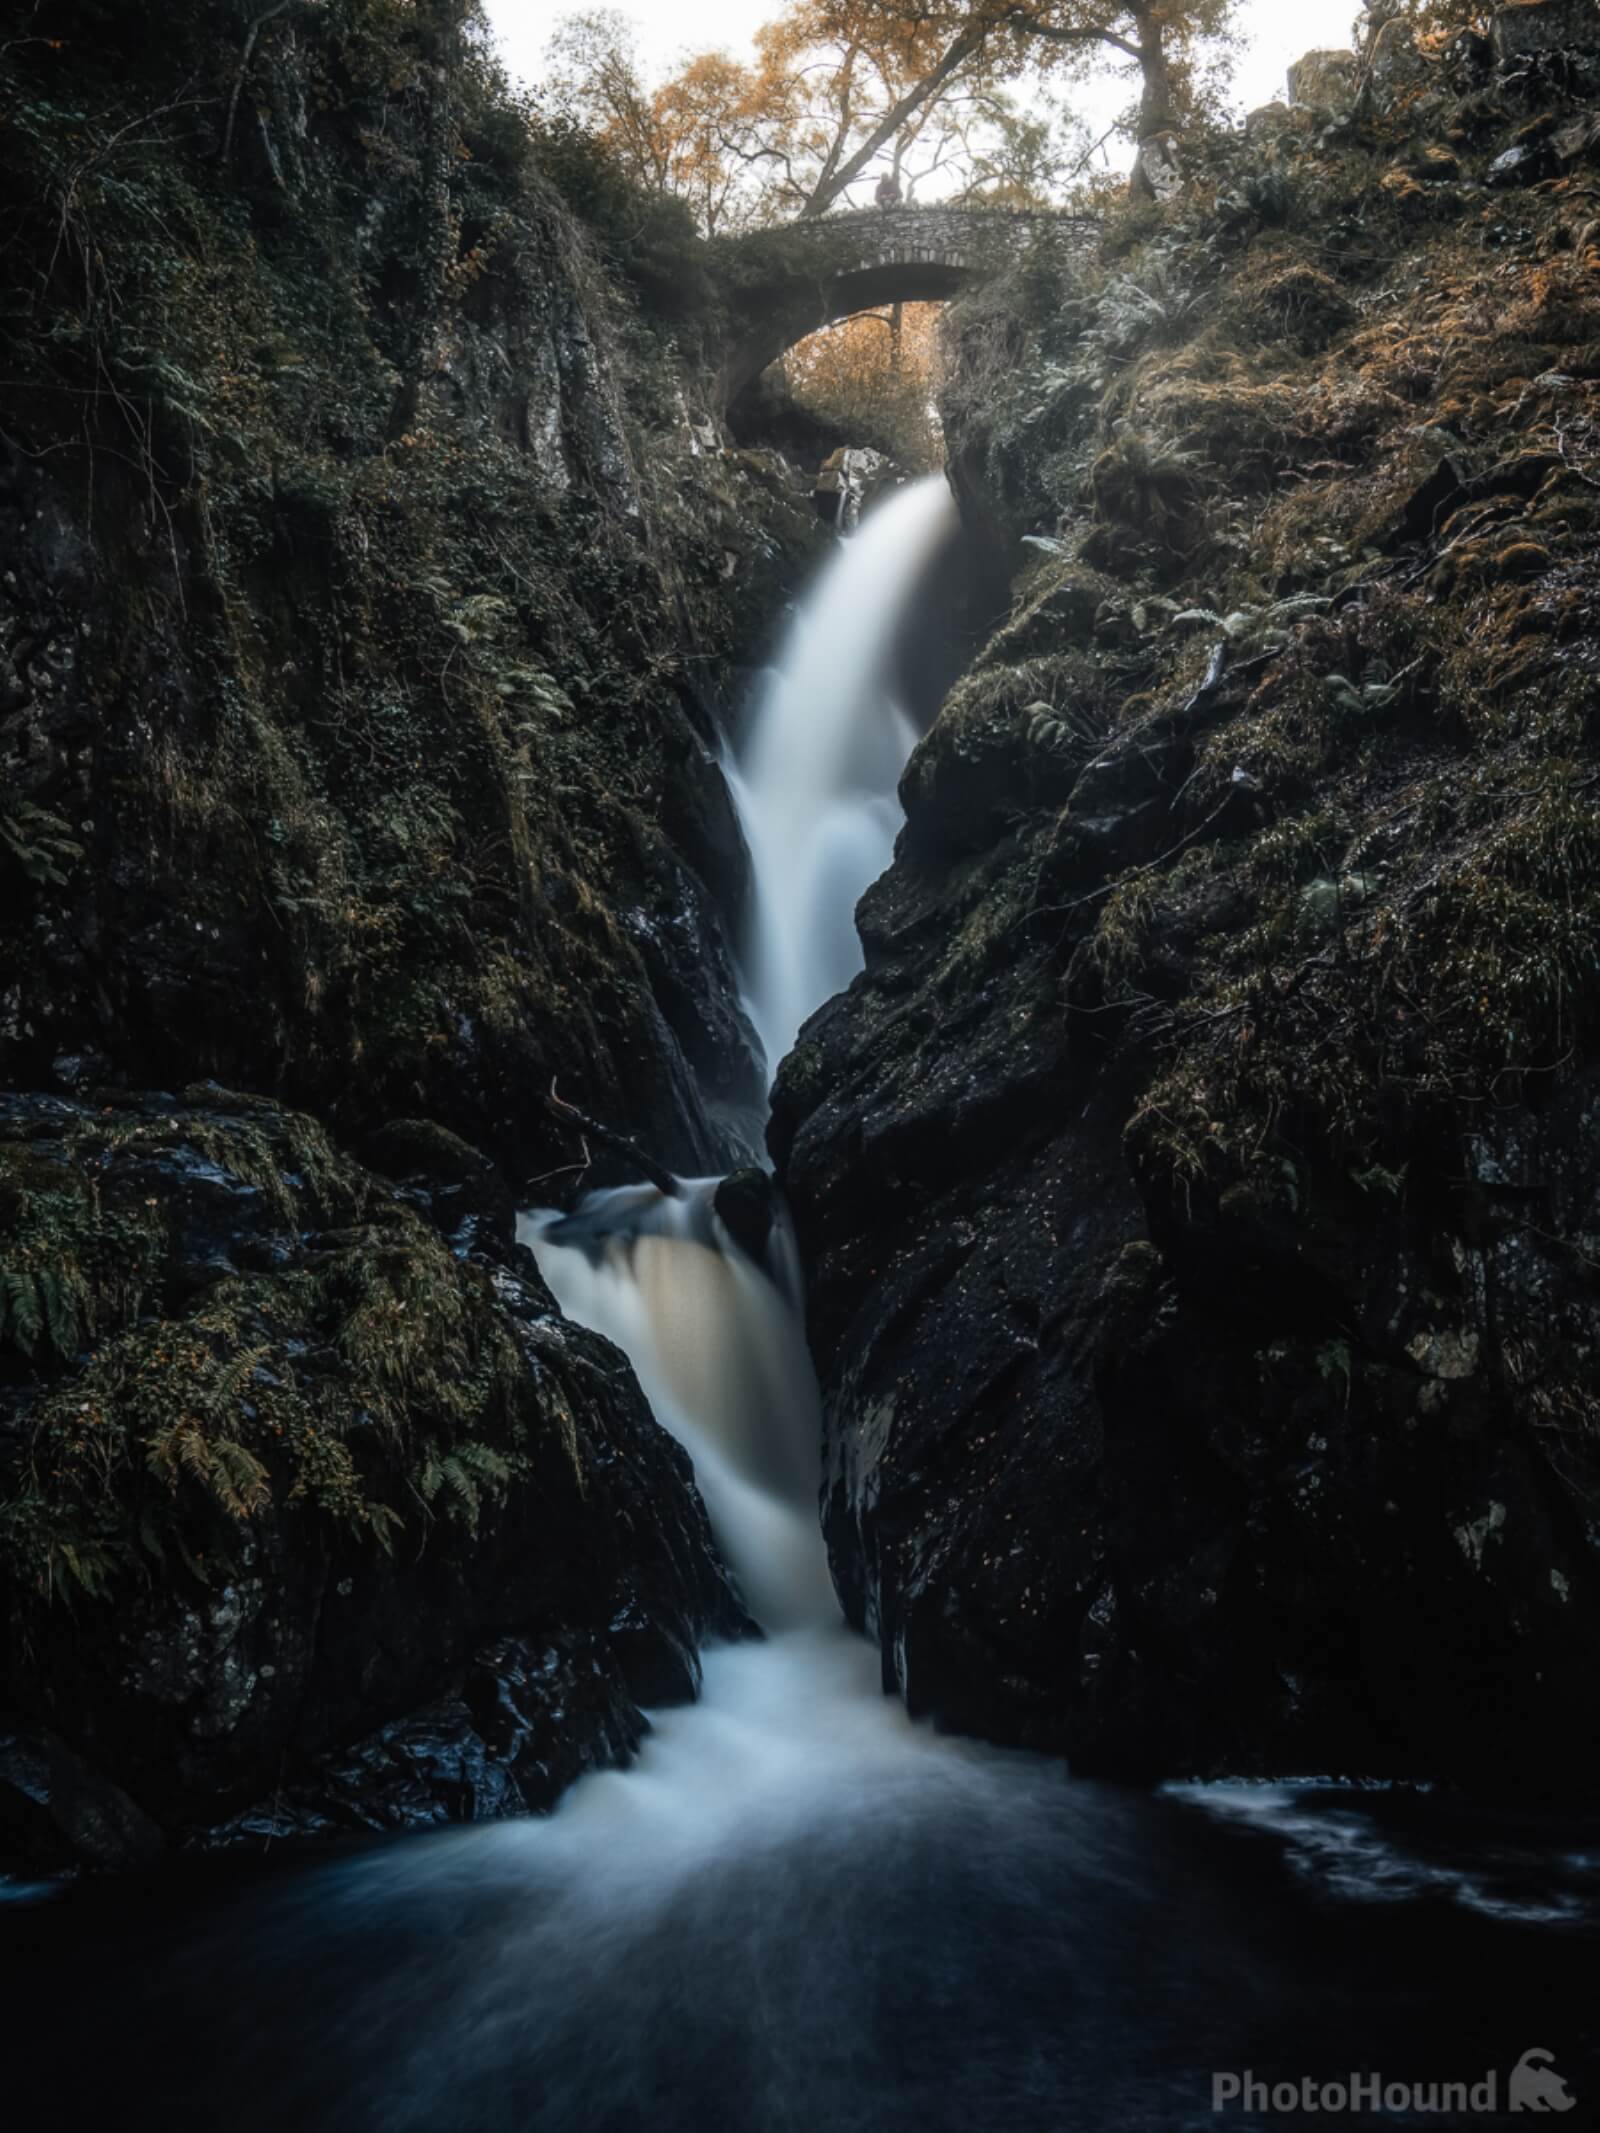 Image of Aira Force and High Forces, Lake District by James Billings.